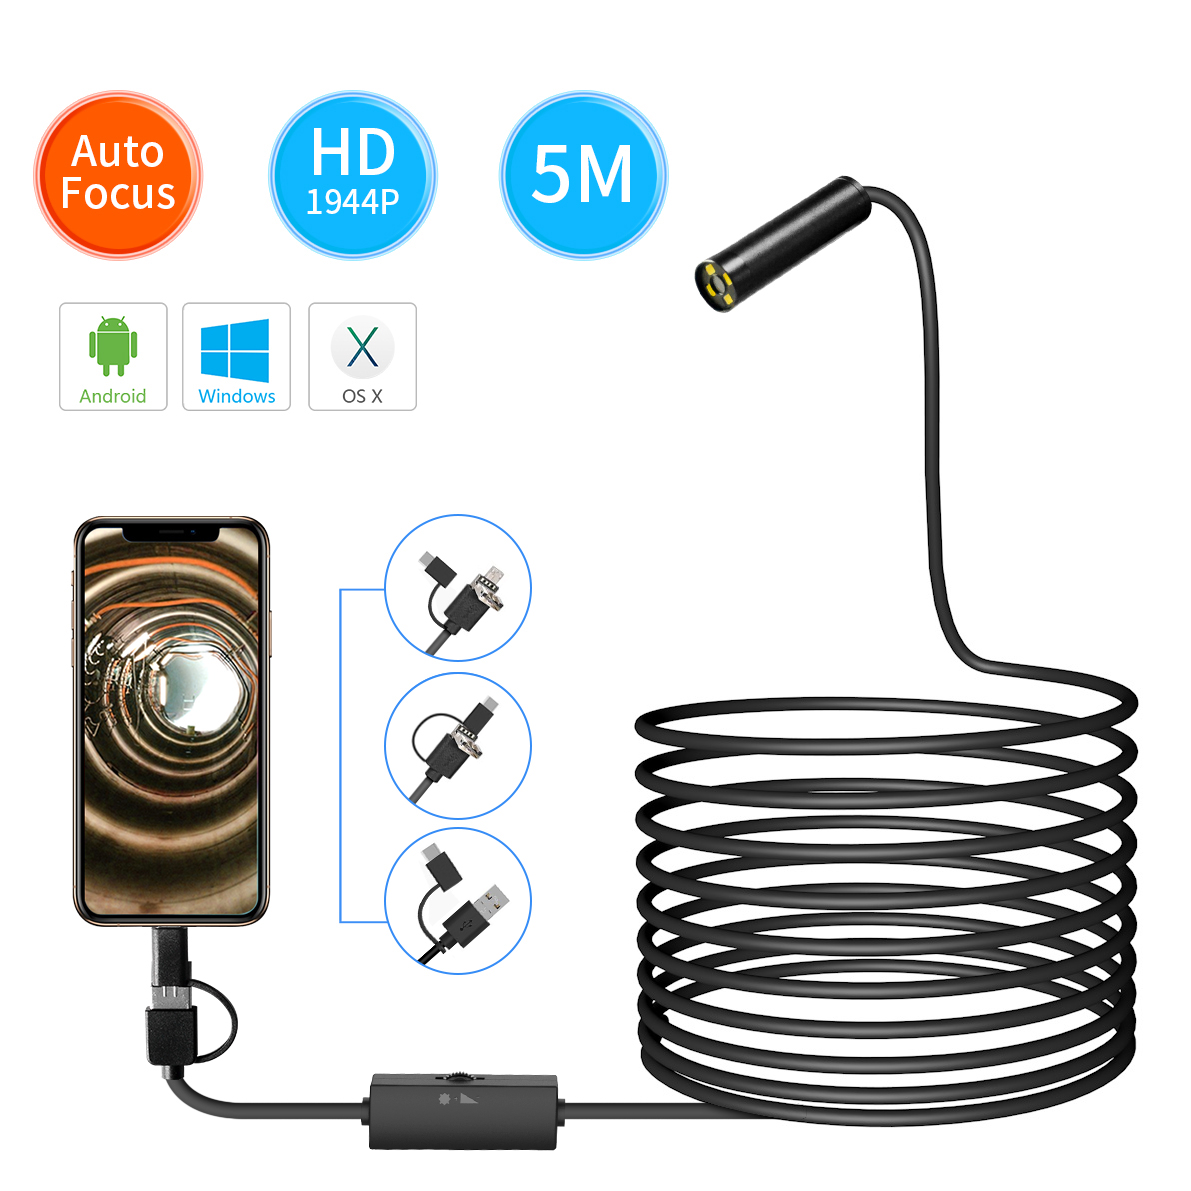 Mac Windows 100W Inline HD Camera with 6 Adjustable LED Lights for Android HM2 Ear Clean Endoscope USB Endoscope 